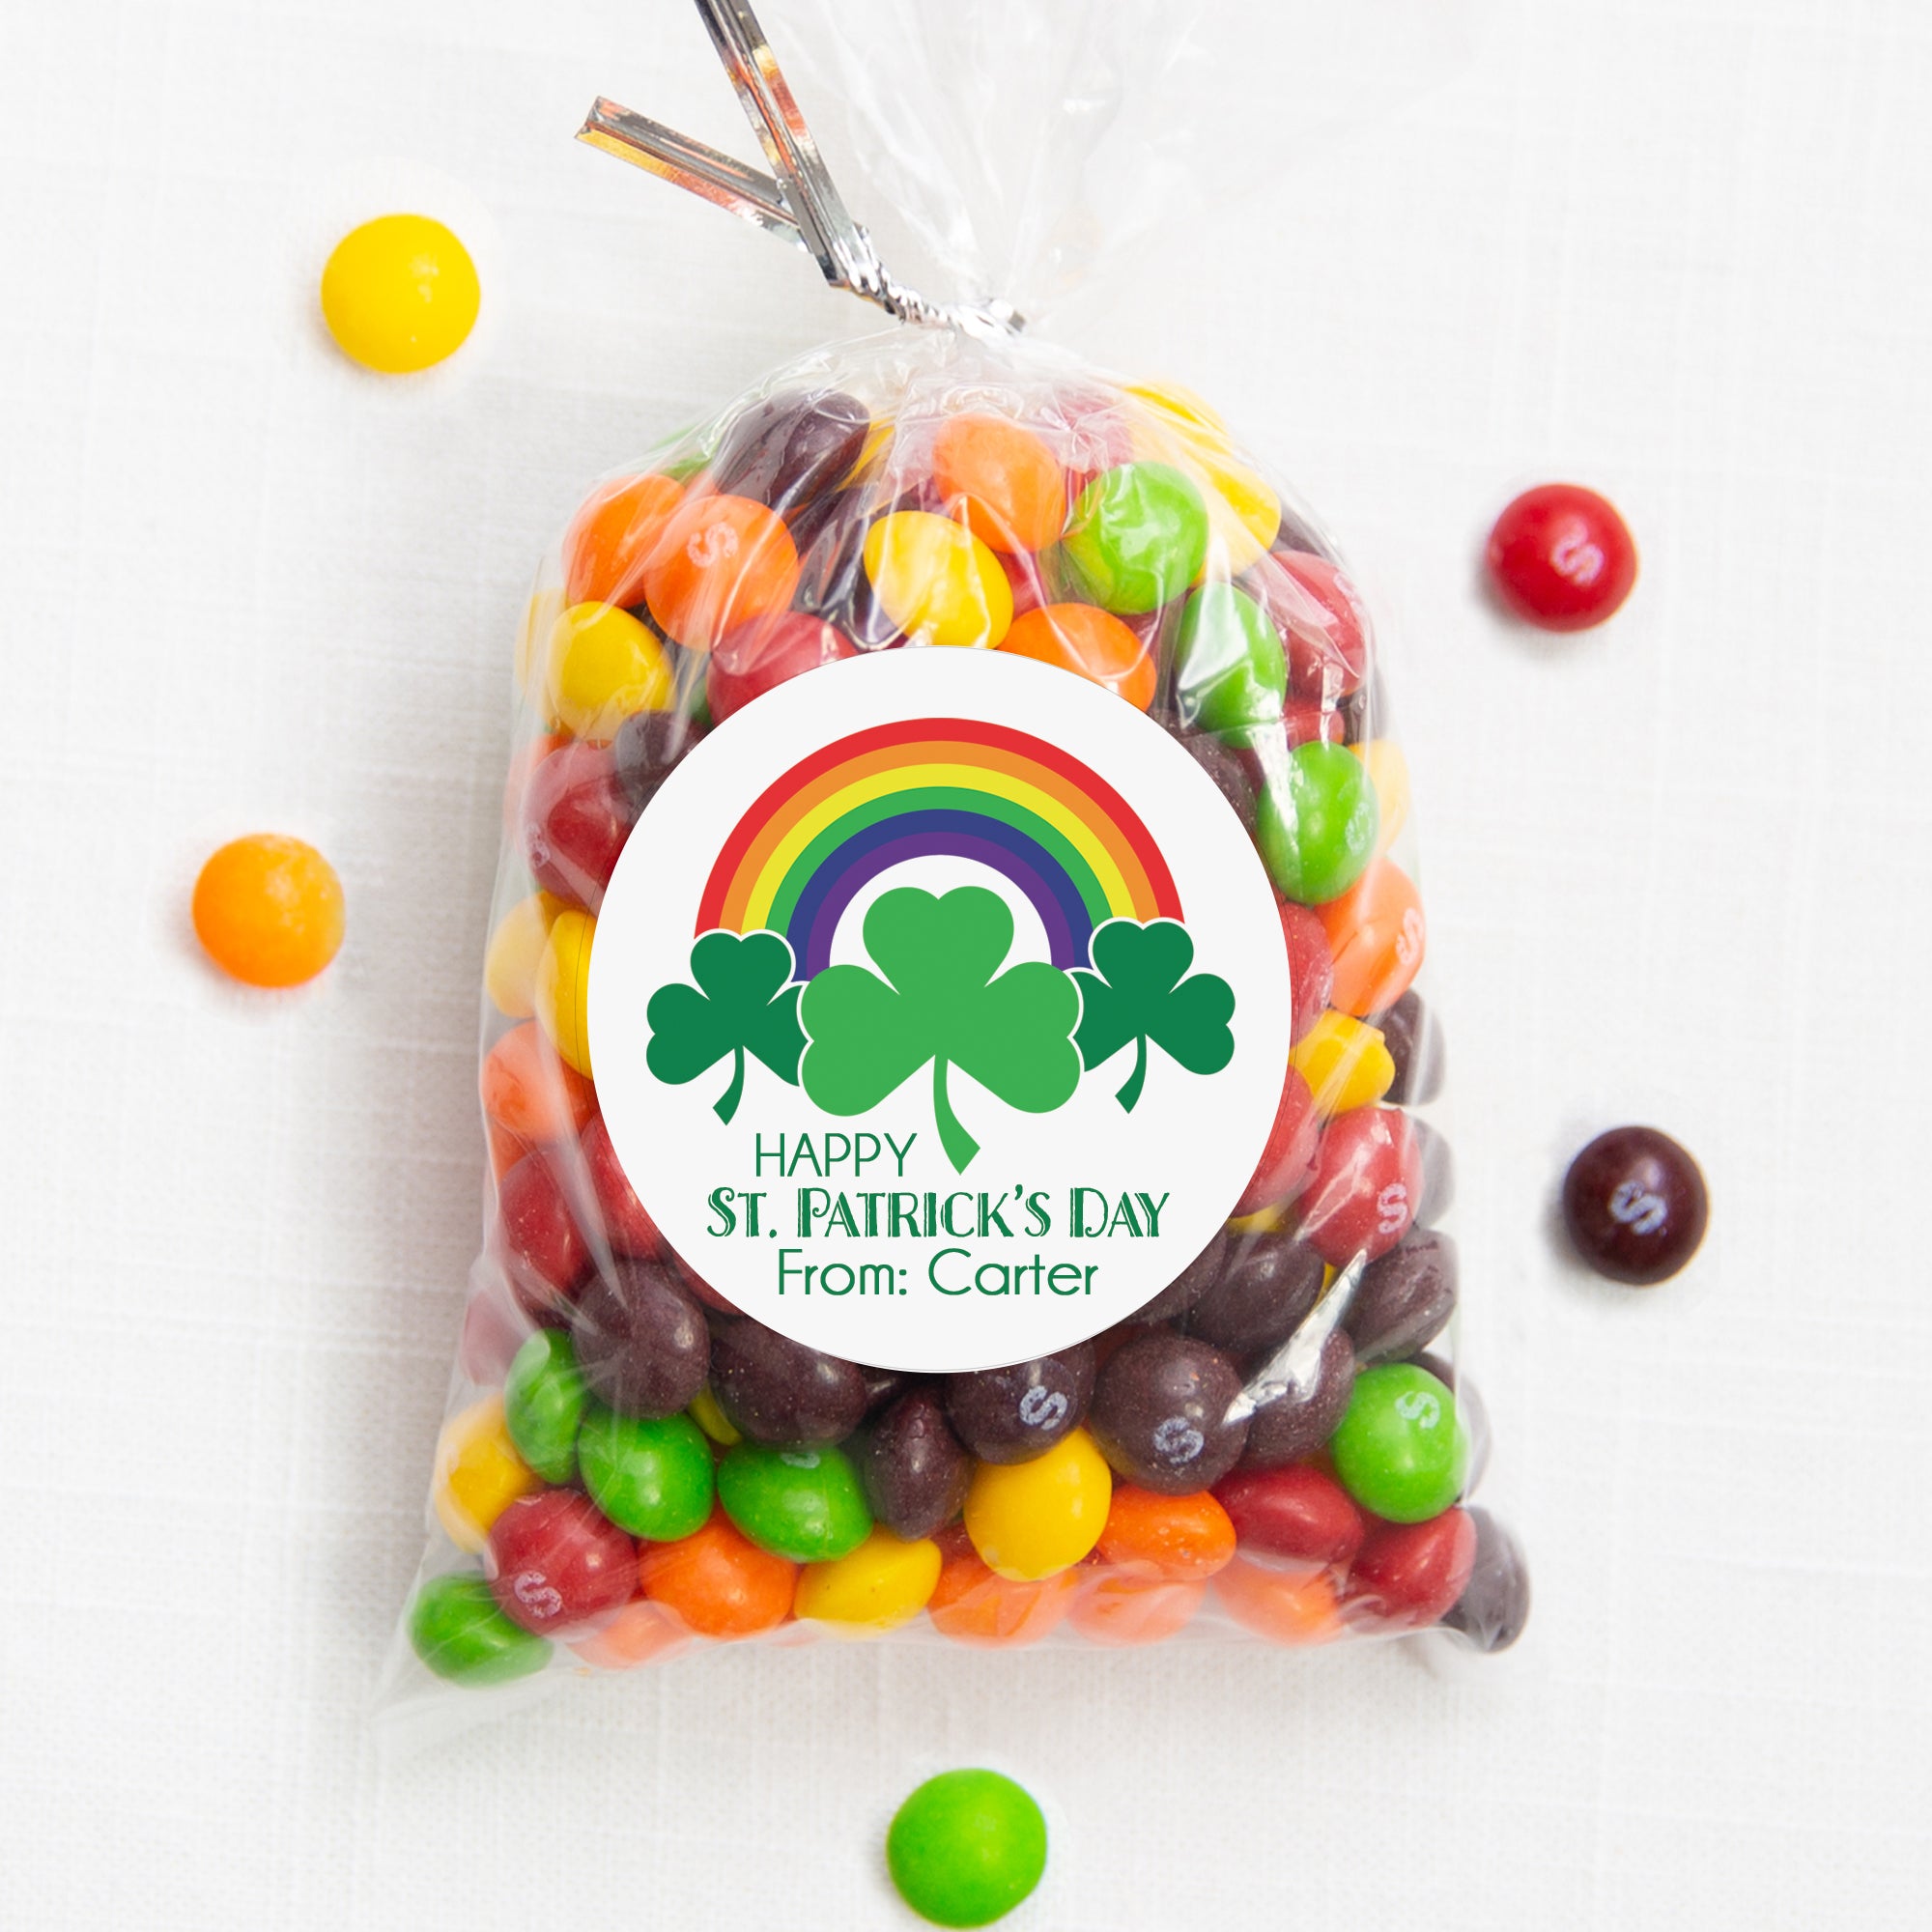 Rainbow and Shamrocks - Personalized Happy St. Patrick's Day class treat bag sticker, round matte stickers, 2.5", Pipsy.com